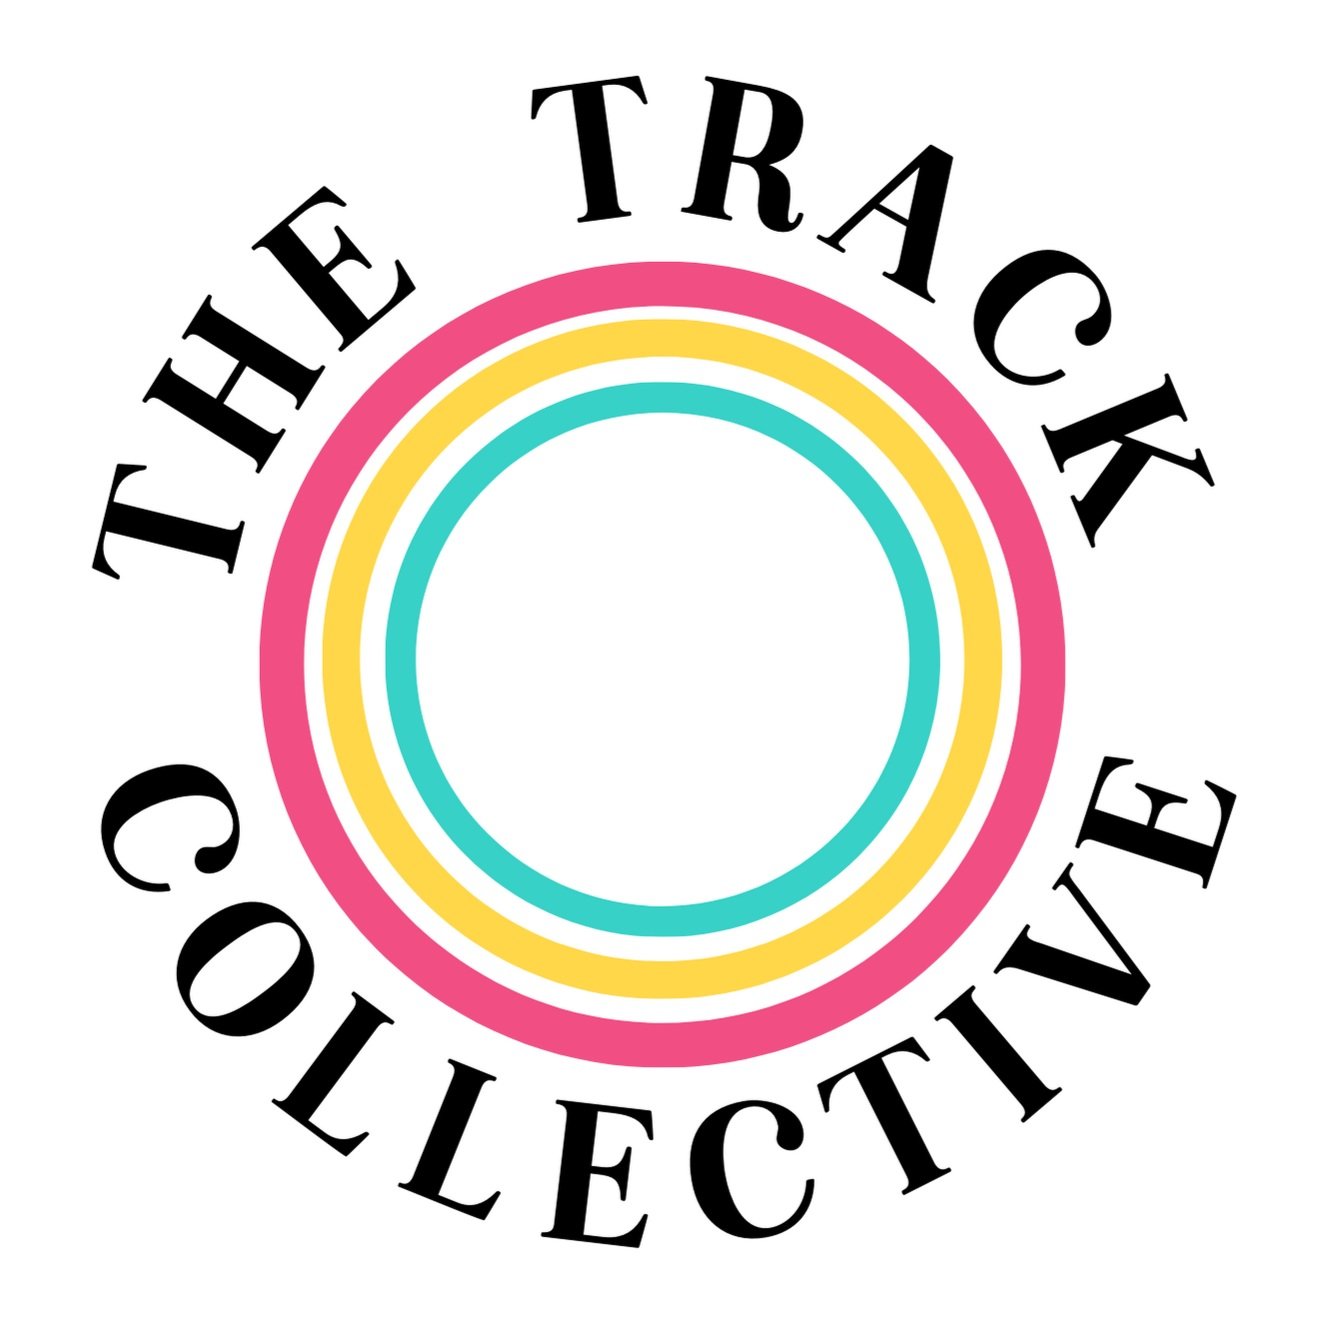 The Track Collective